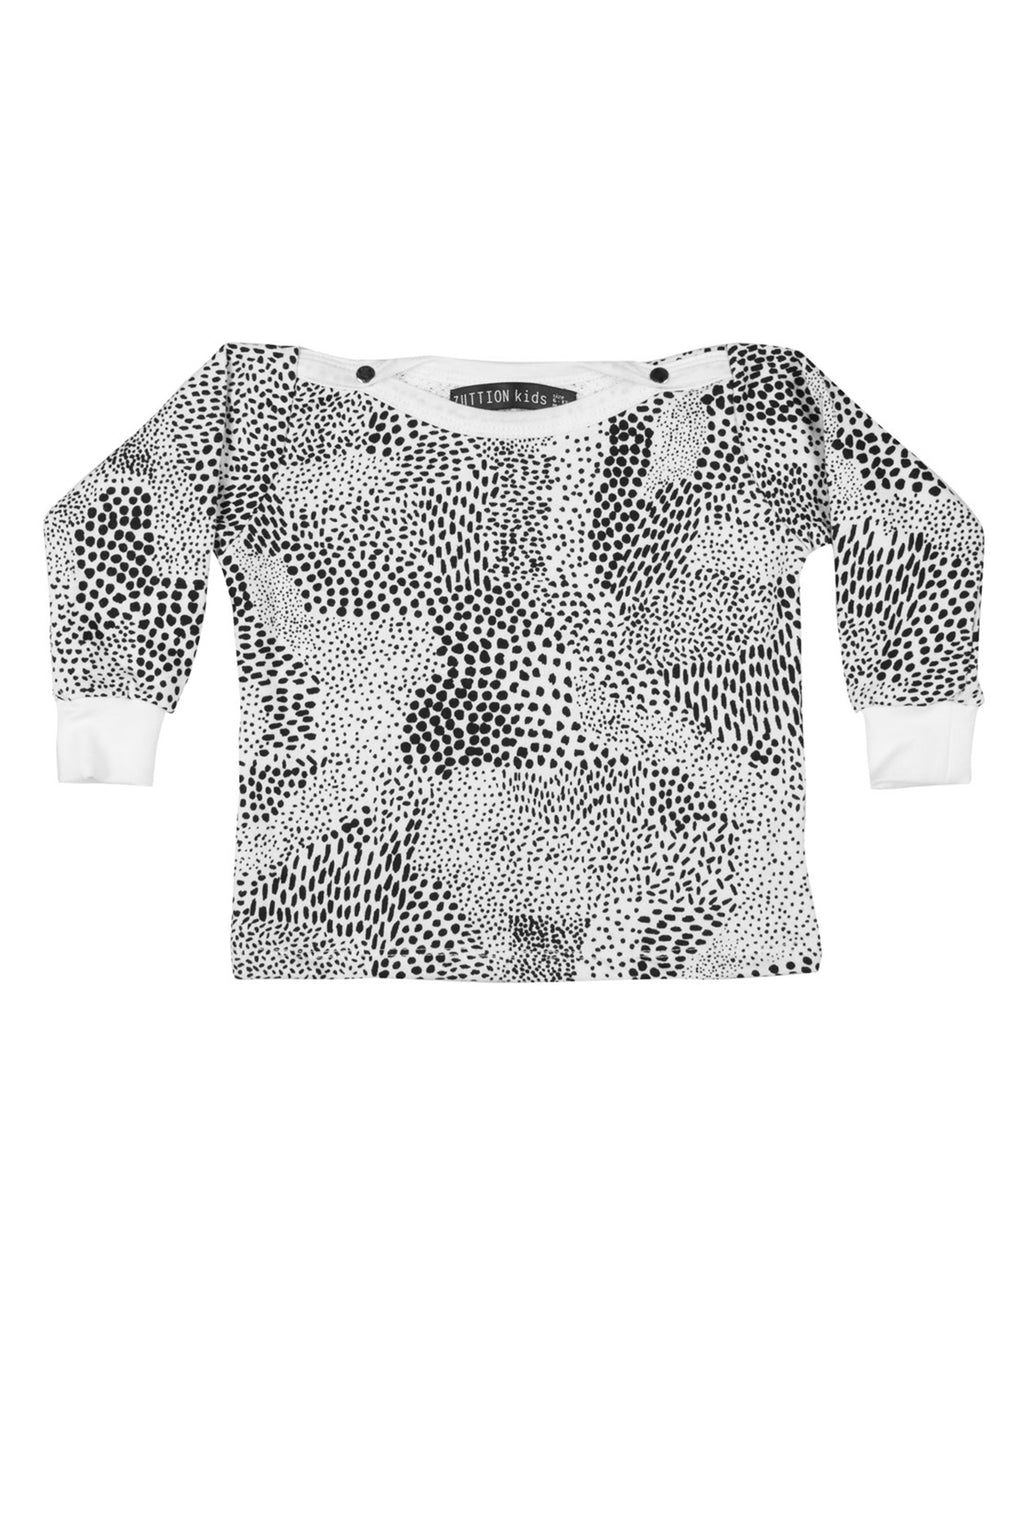 Abstract Baby Sweater White/Black - Zuttion